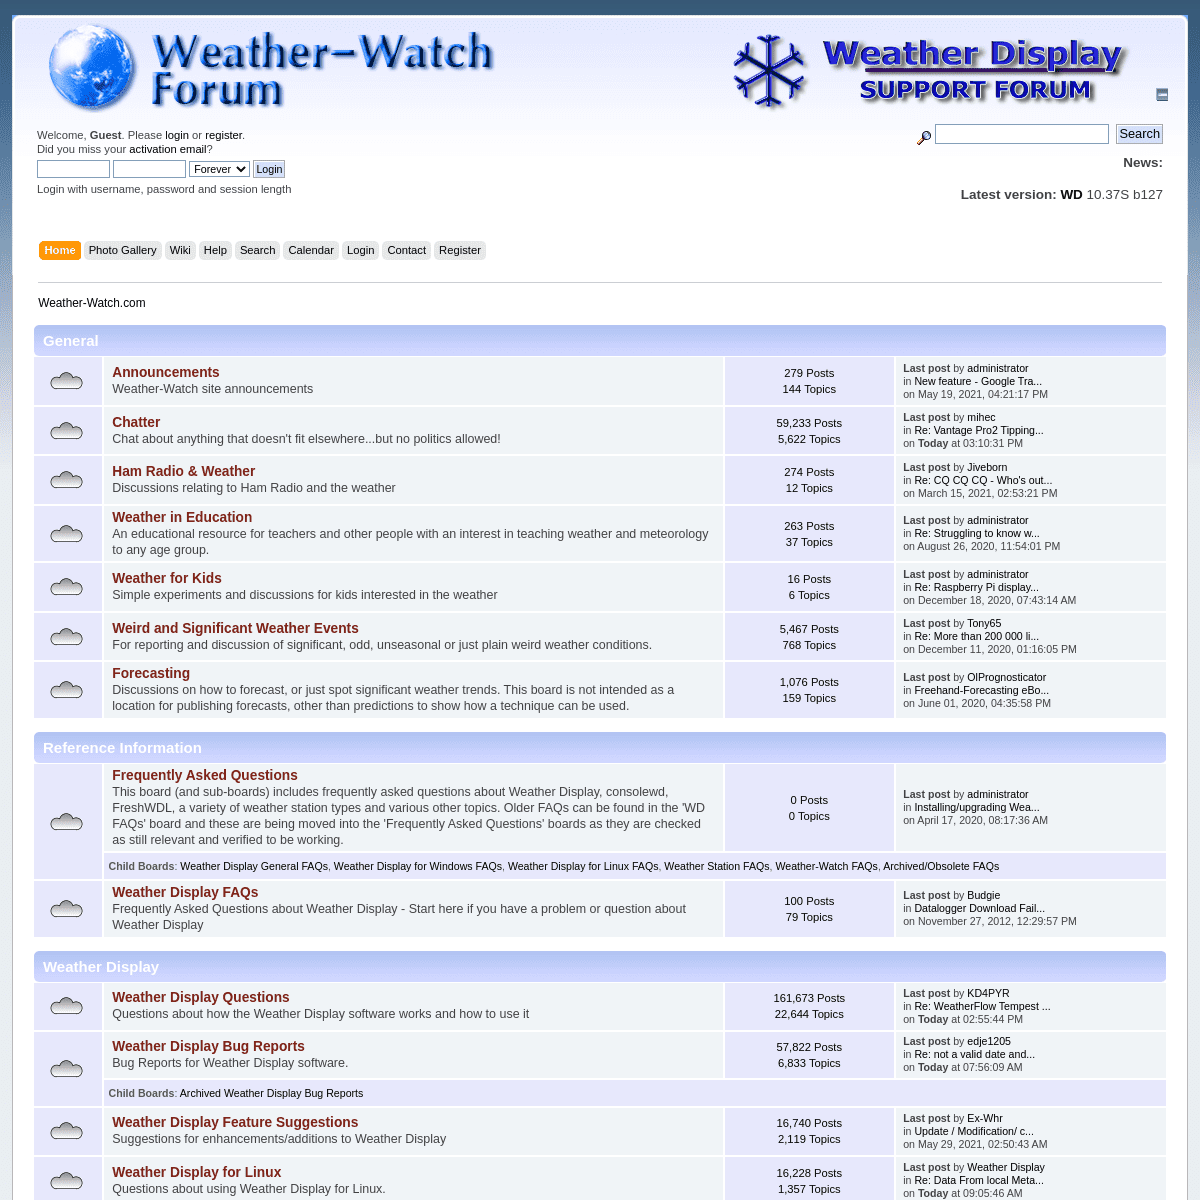 A complete backup of https://weather-watch.com